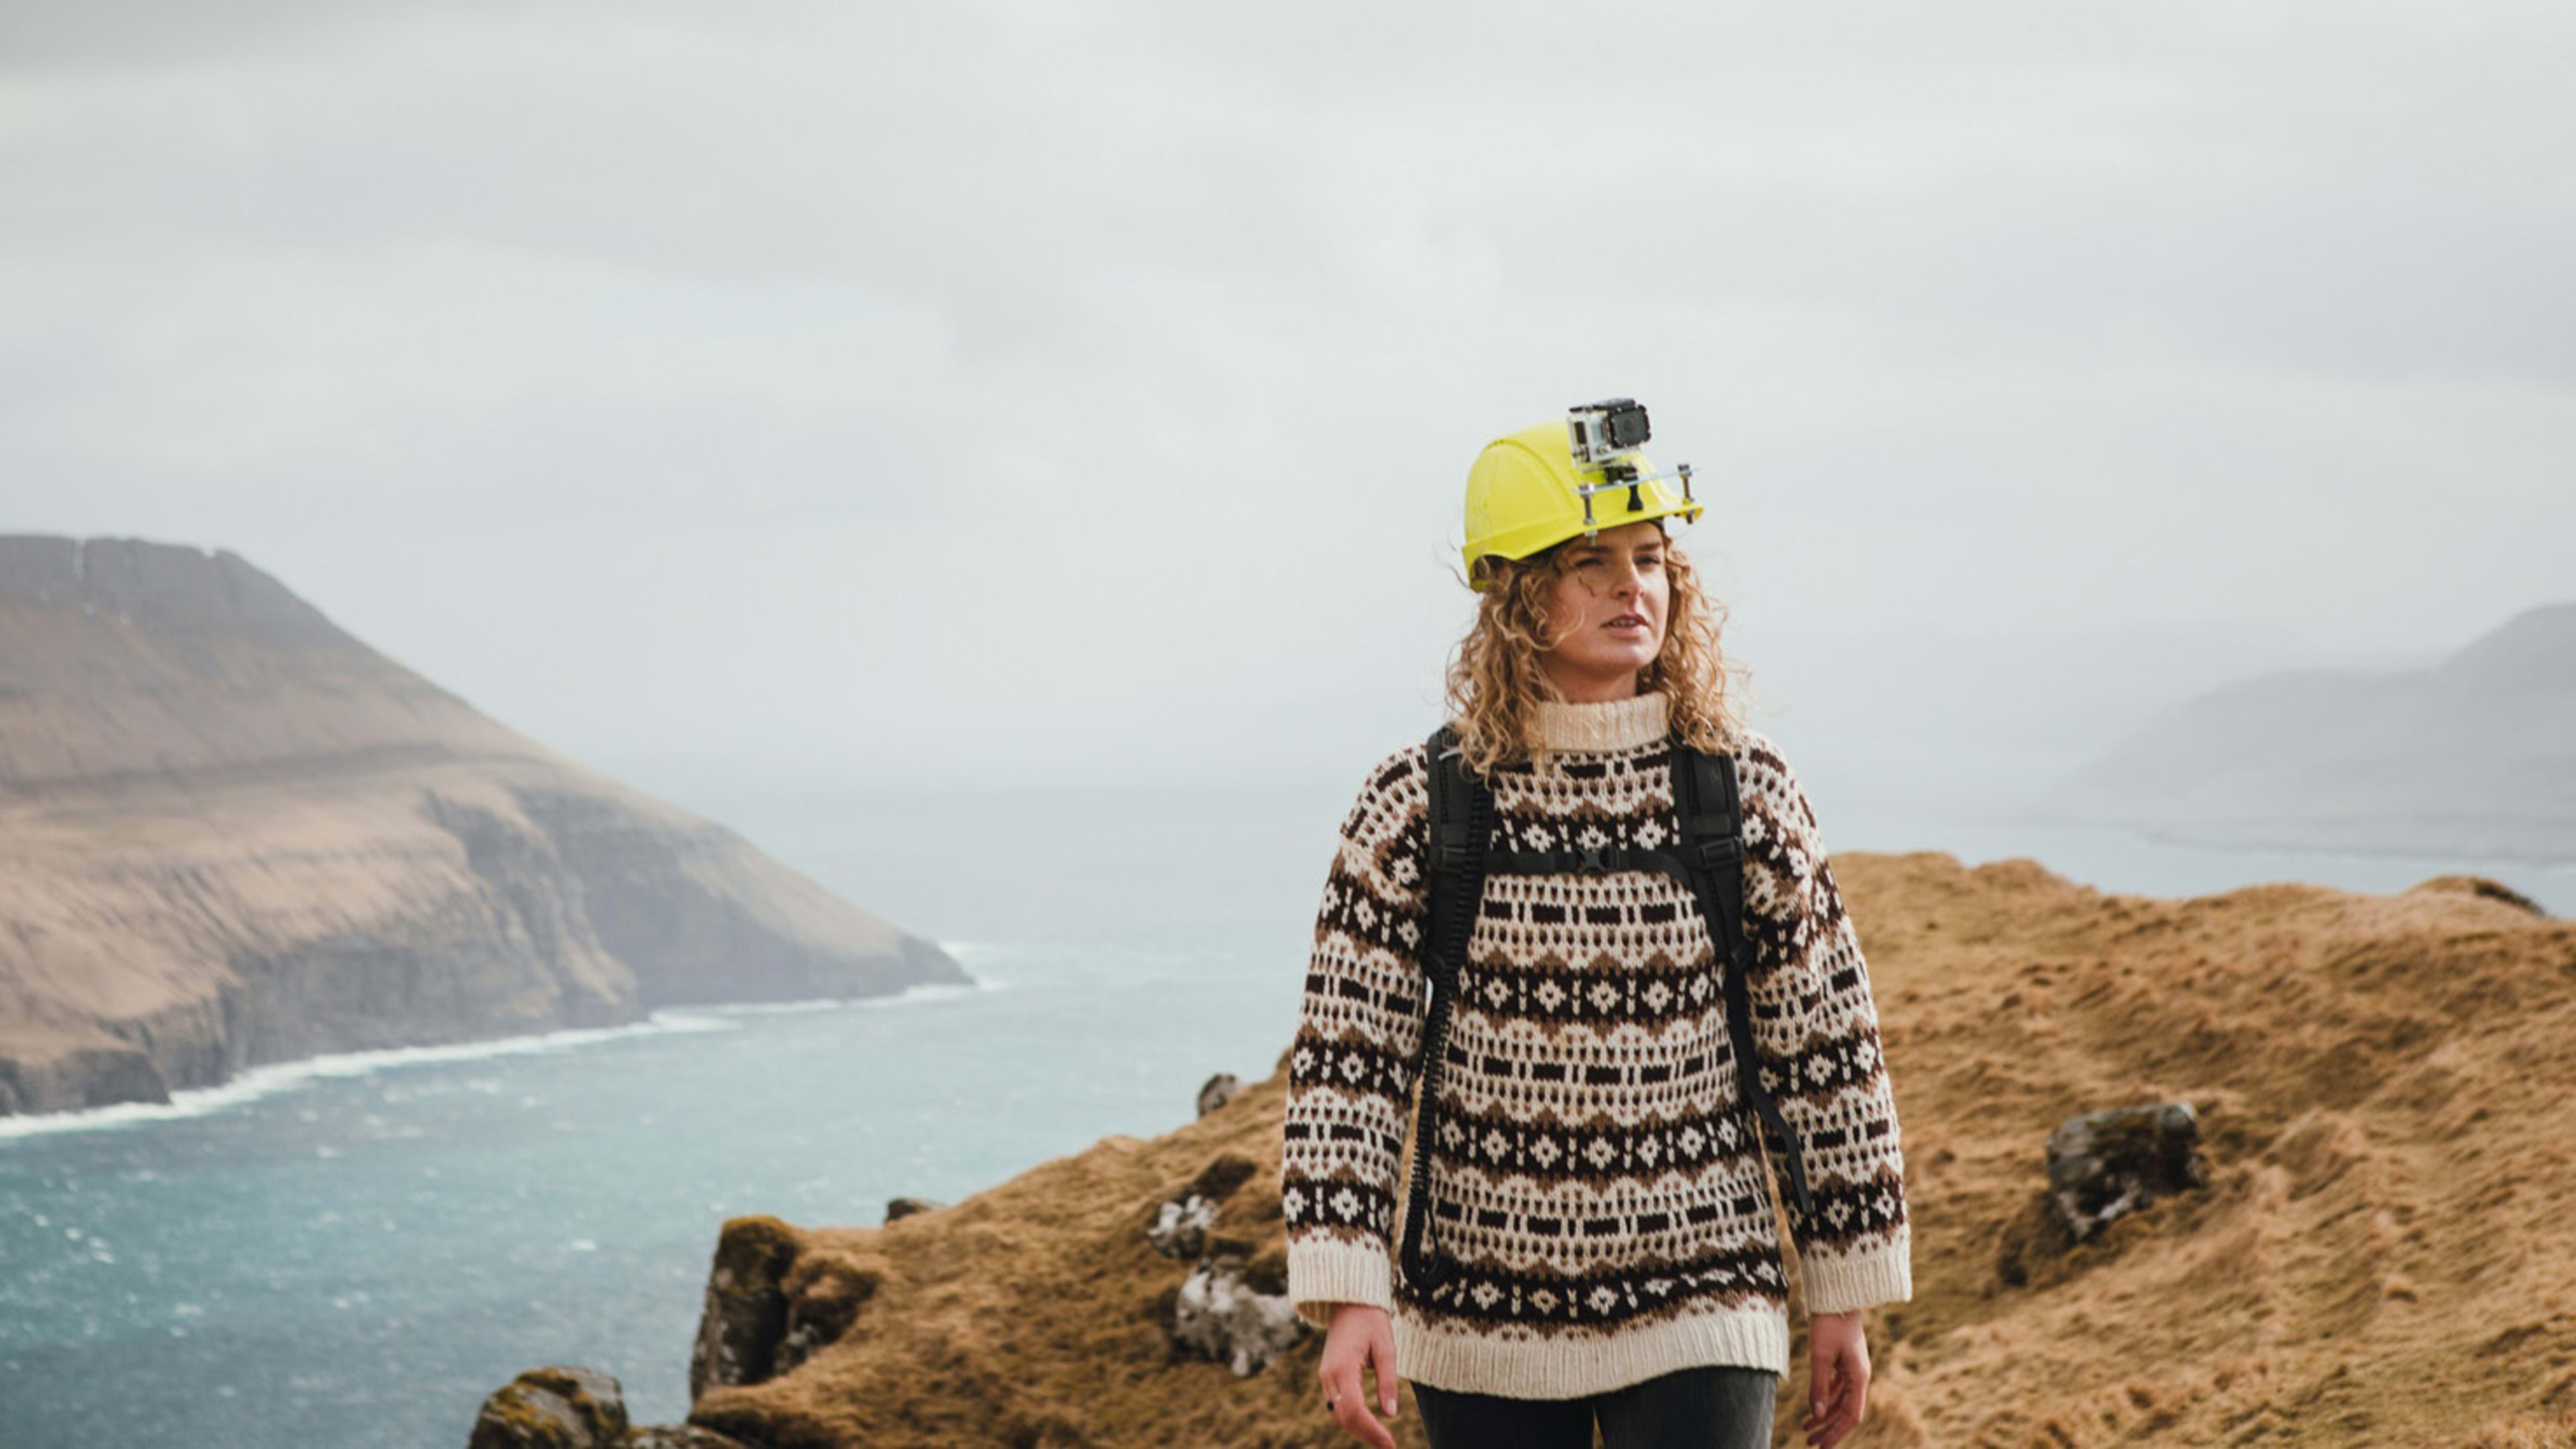 Tourism in the age of COVID-19: You can now remote control a human tour guide in the Faroe Islands